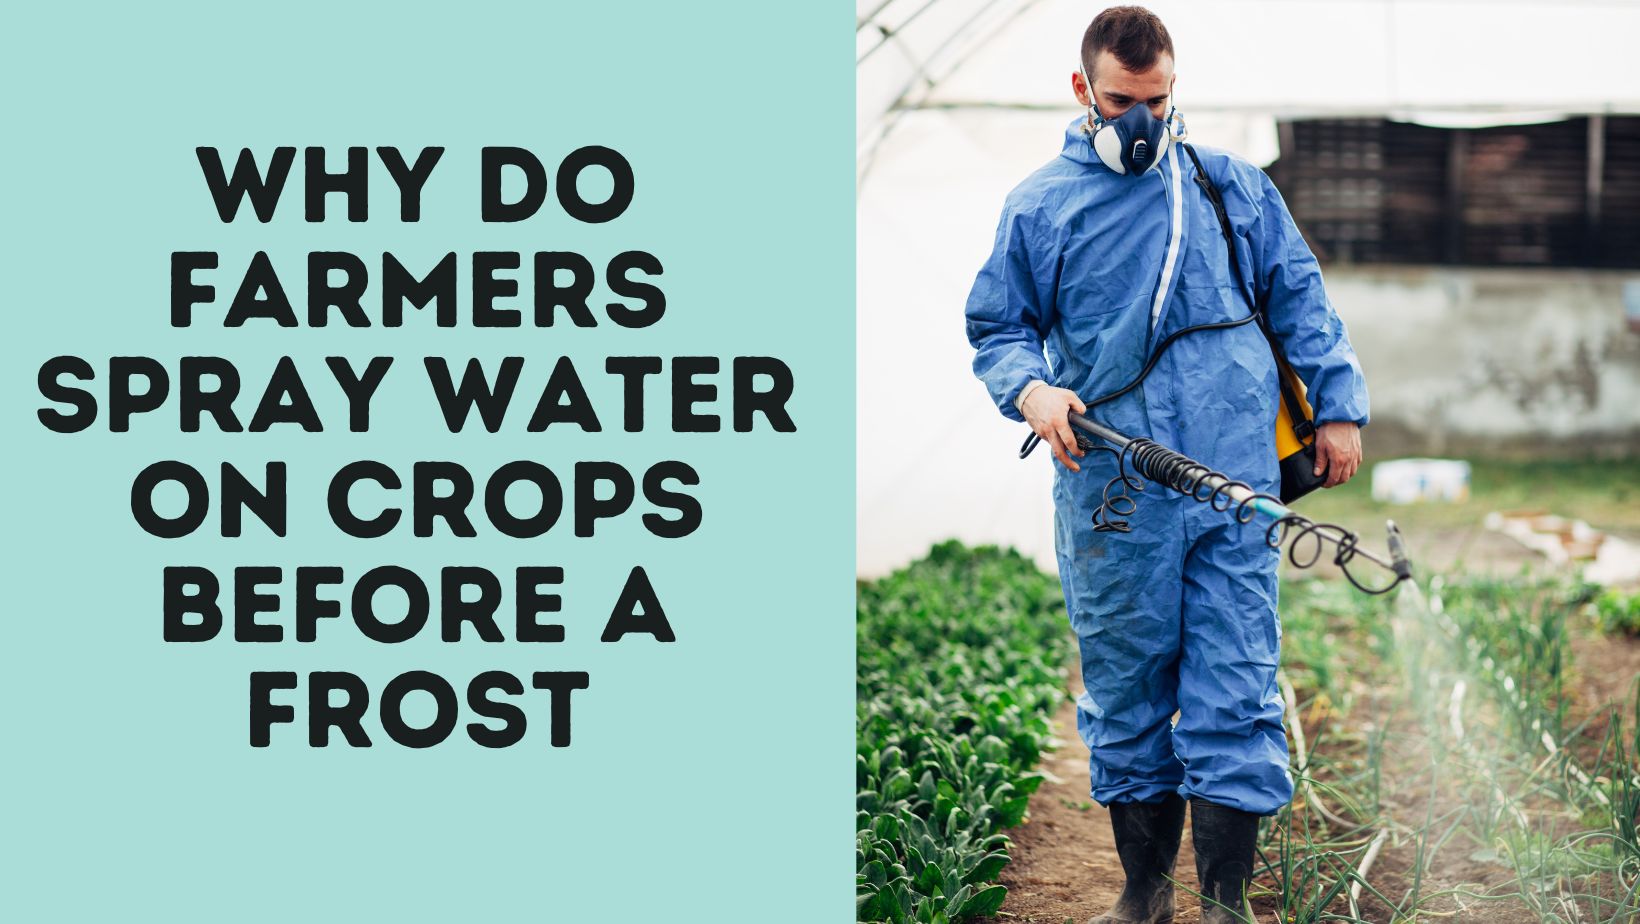 Why Do Farmers Spray Water On Crops Before A Frost